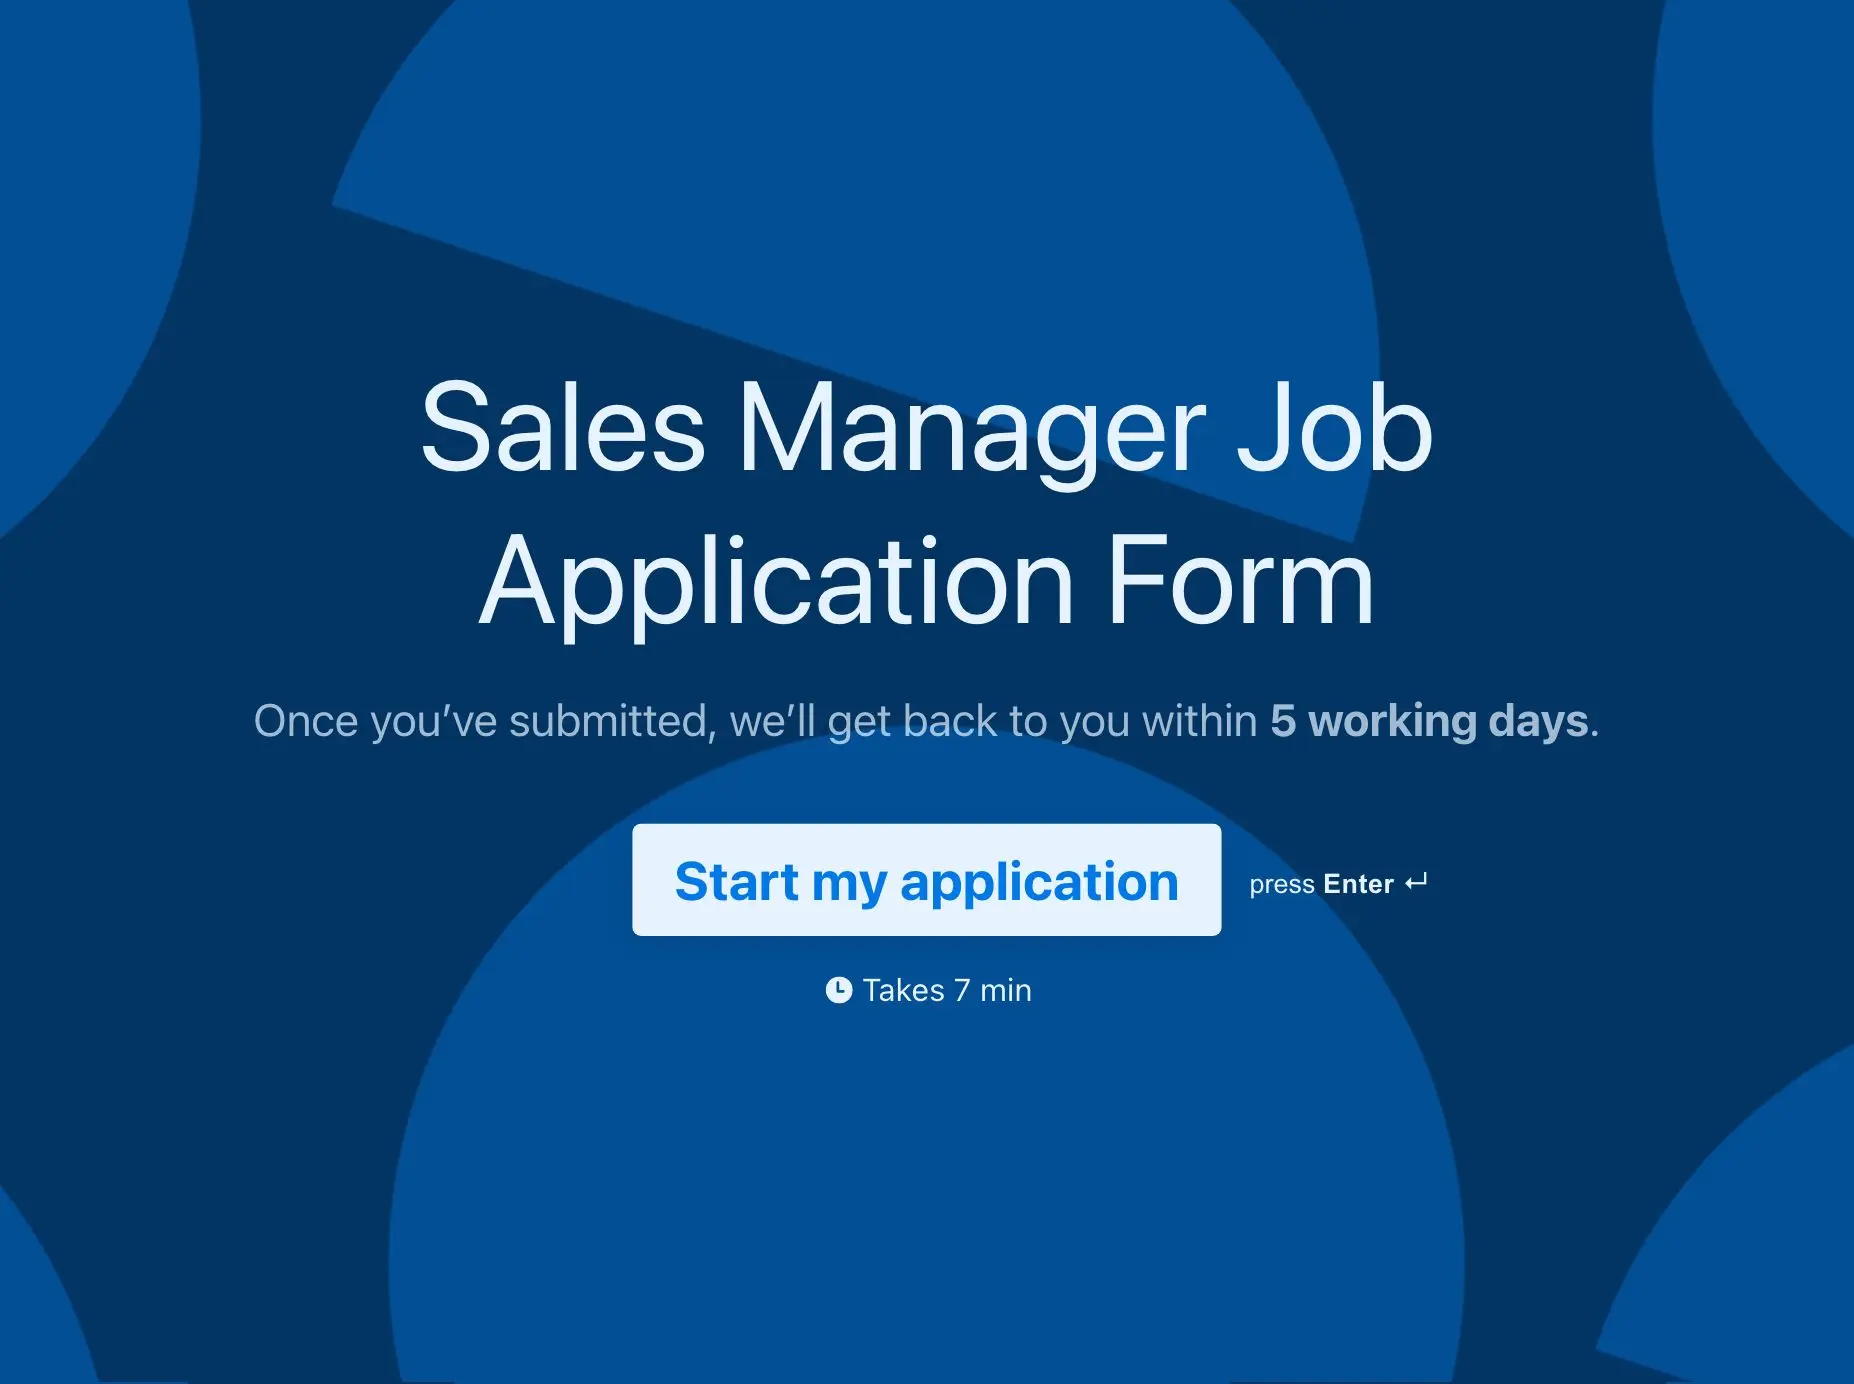 Sales Manager Job Application Form Template Hero